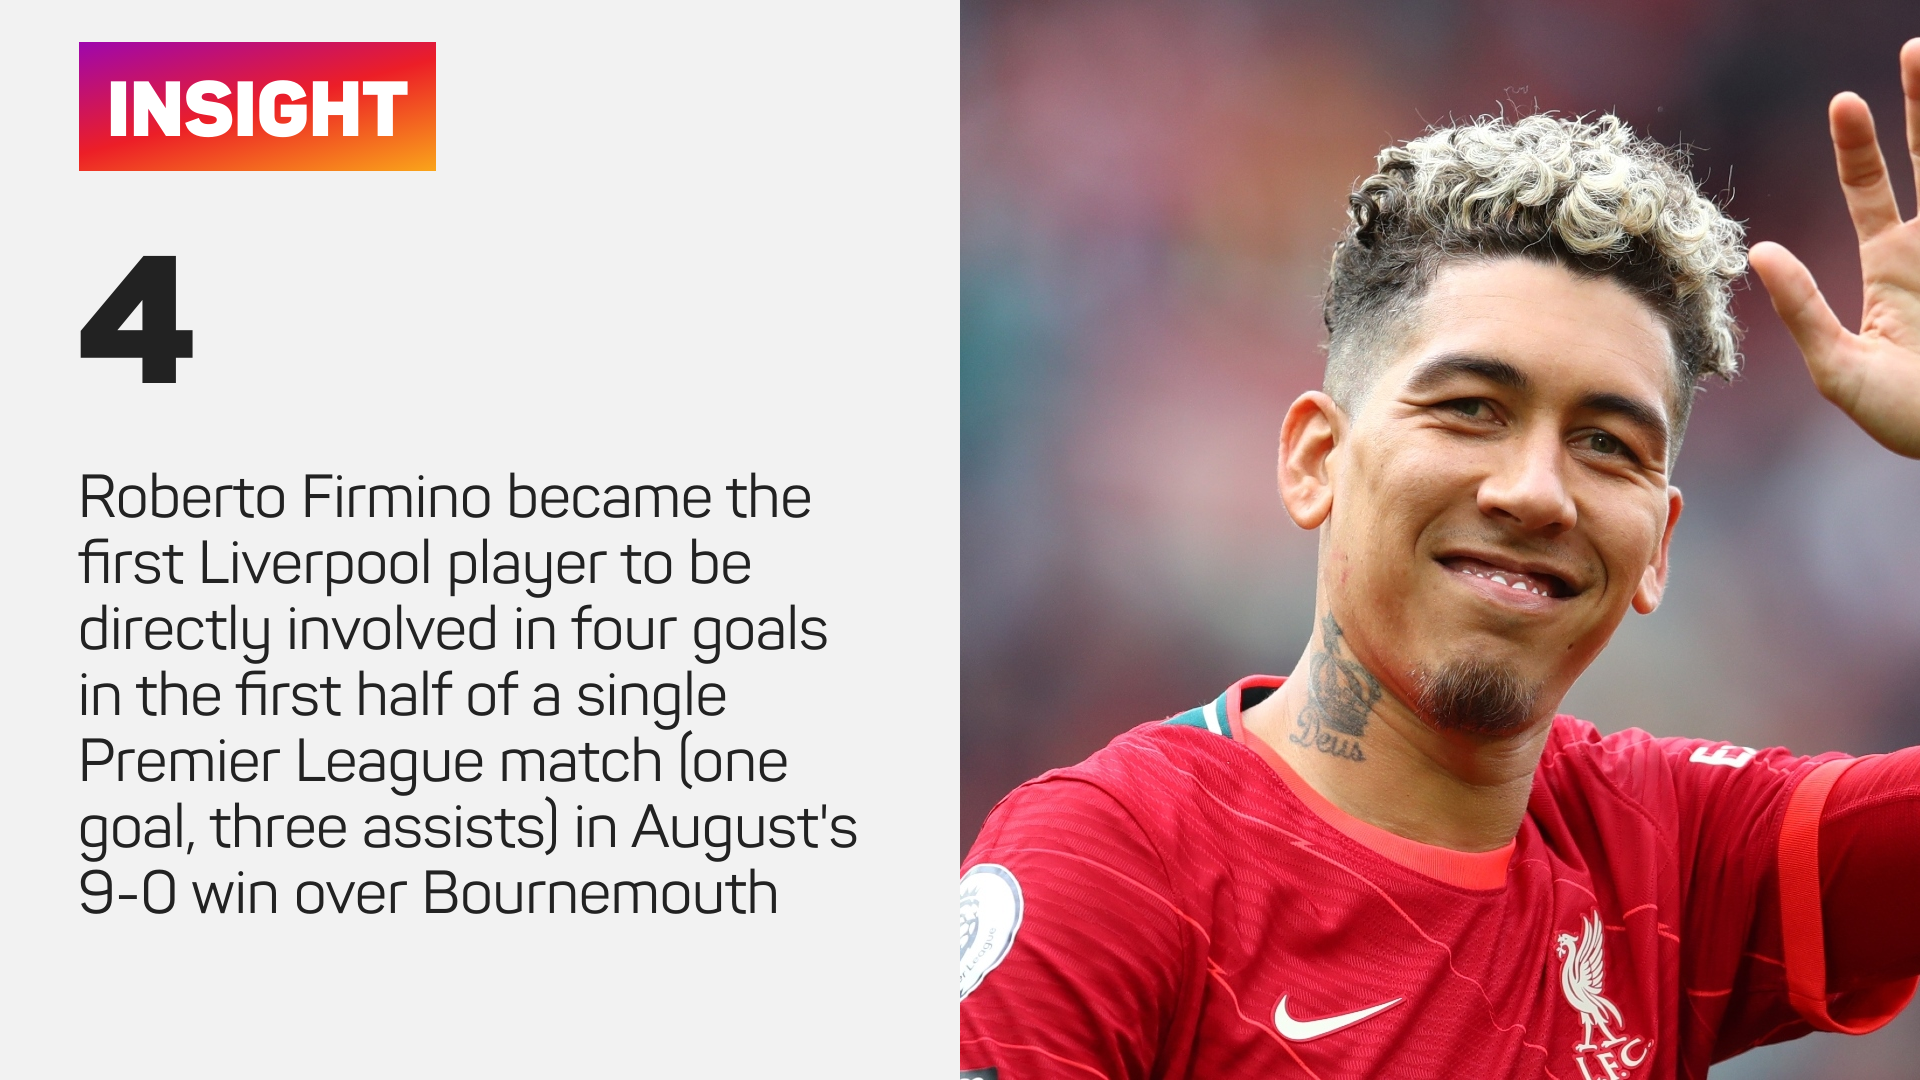 Roberto Firmino was involved in four first-half goals against Bournemouth